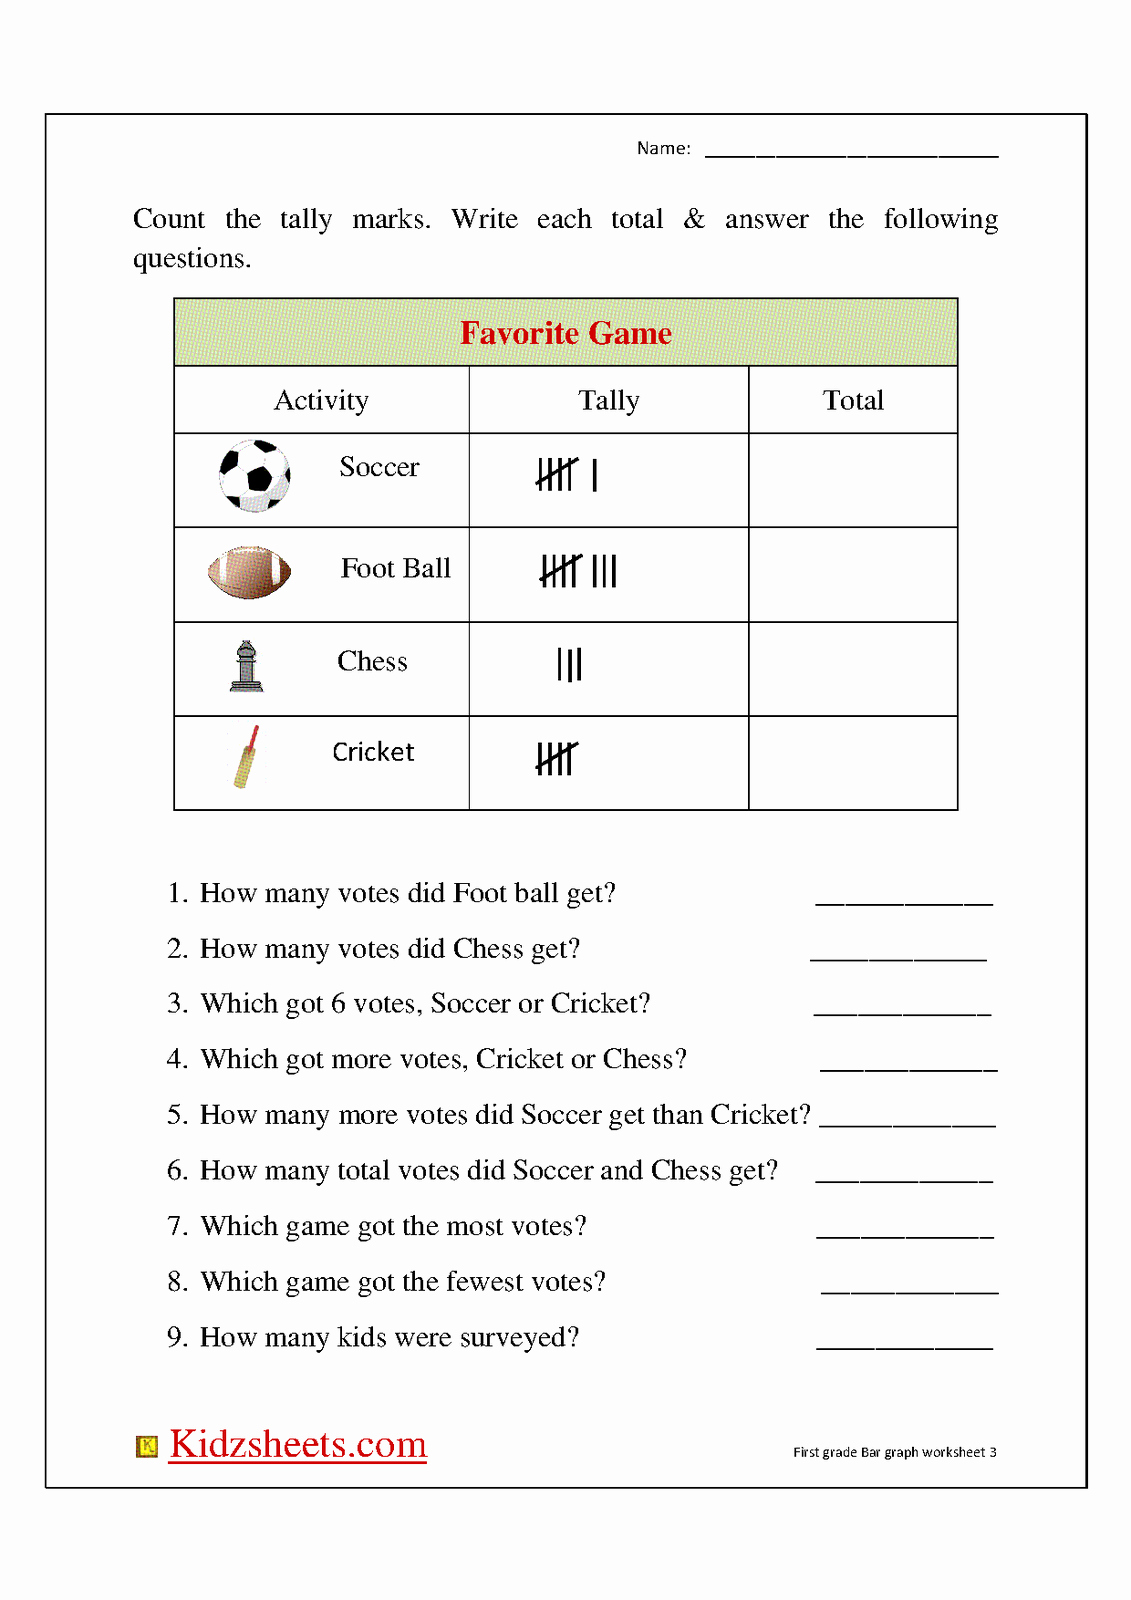 Graphing Worksheets for First Grade Awesome Kidz Worksheets October 2012